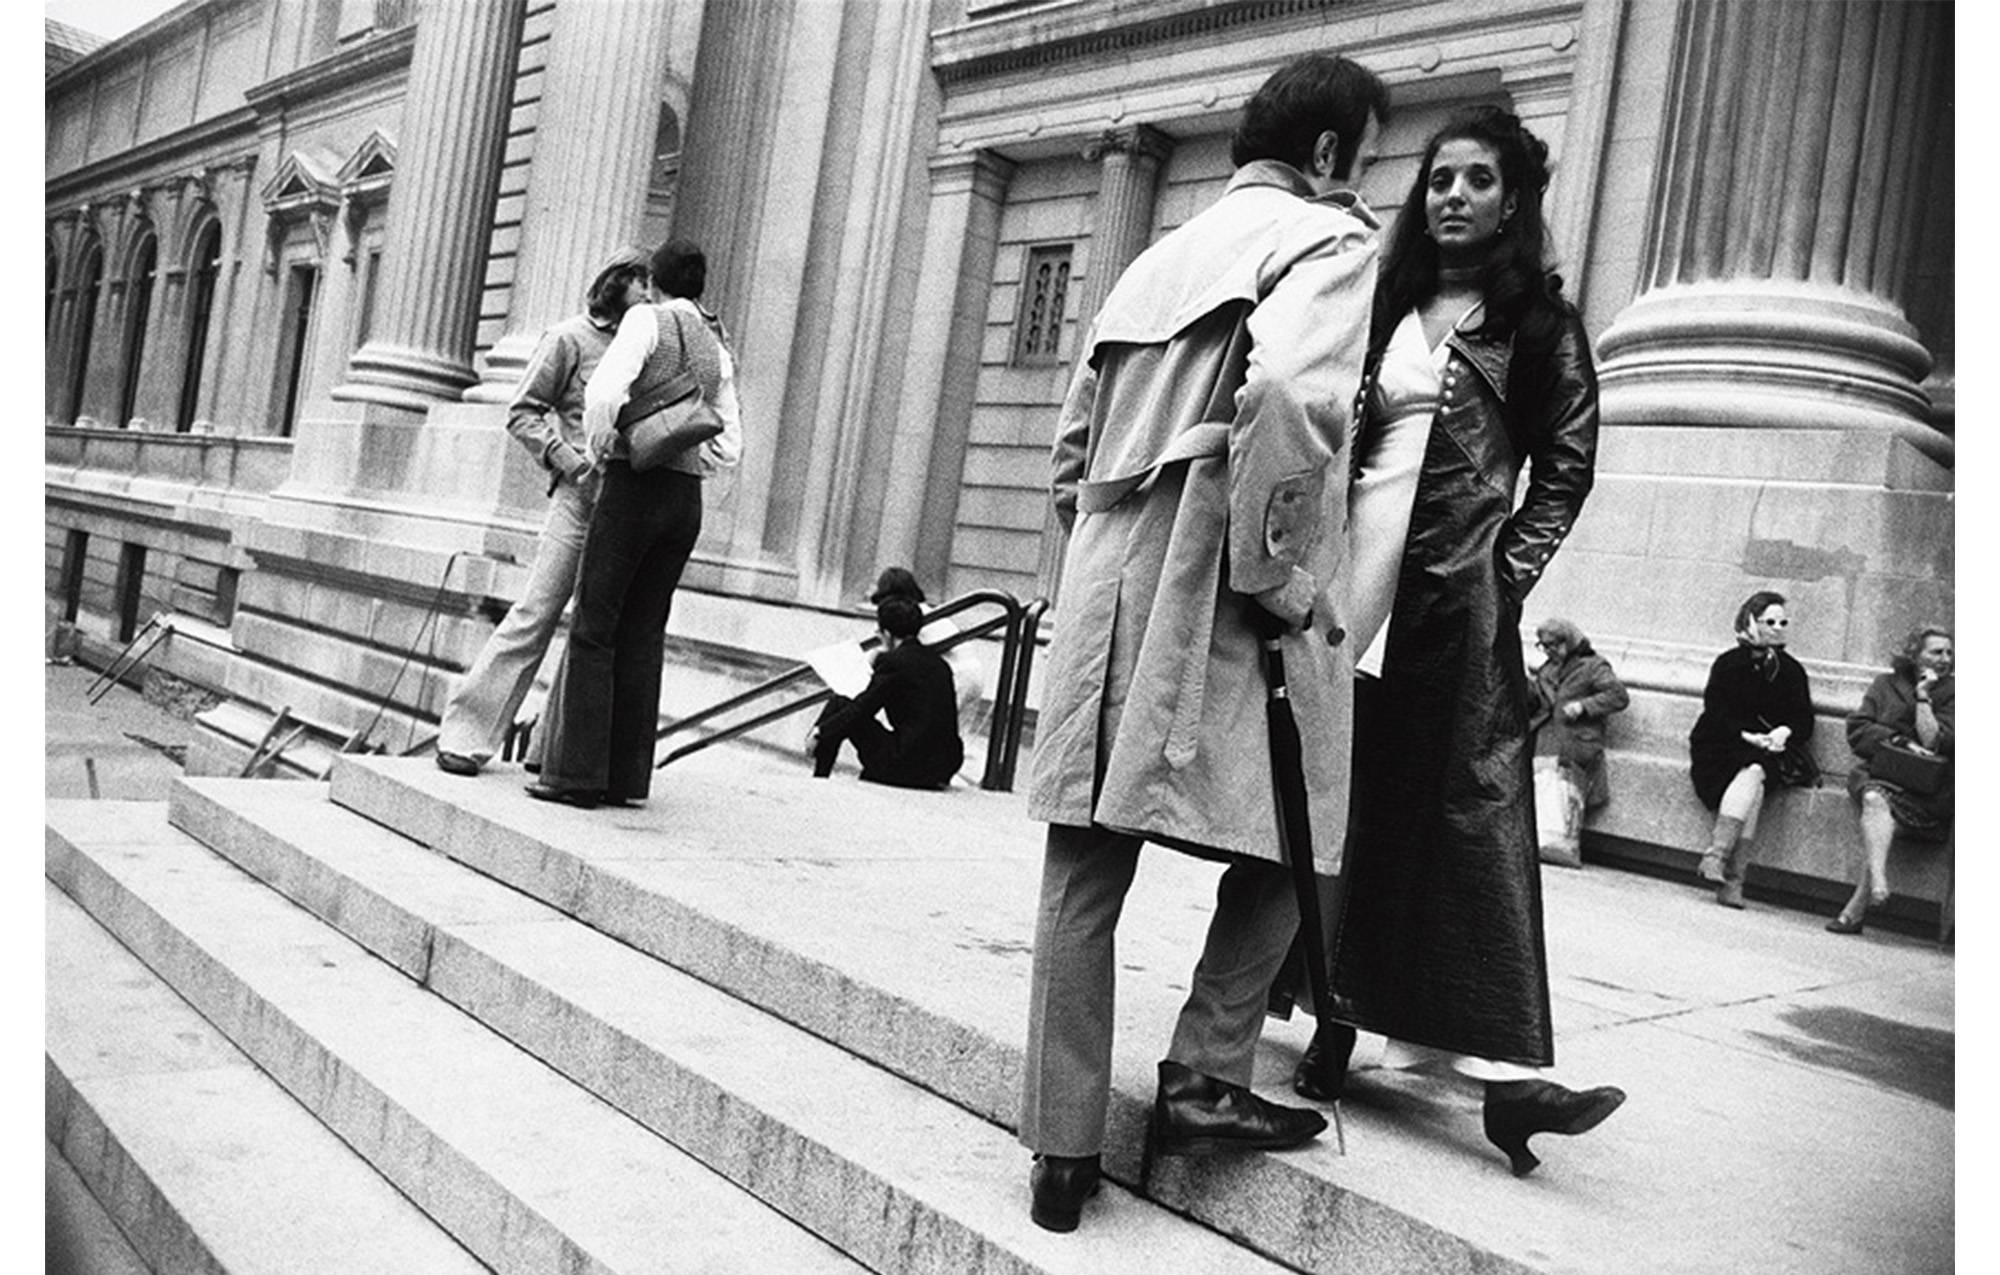 steps of the Metropolitan museum, two couples stand close together talking, front couple in coats, three older women sit near the column at back right and two people sit on steps in distance